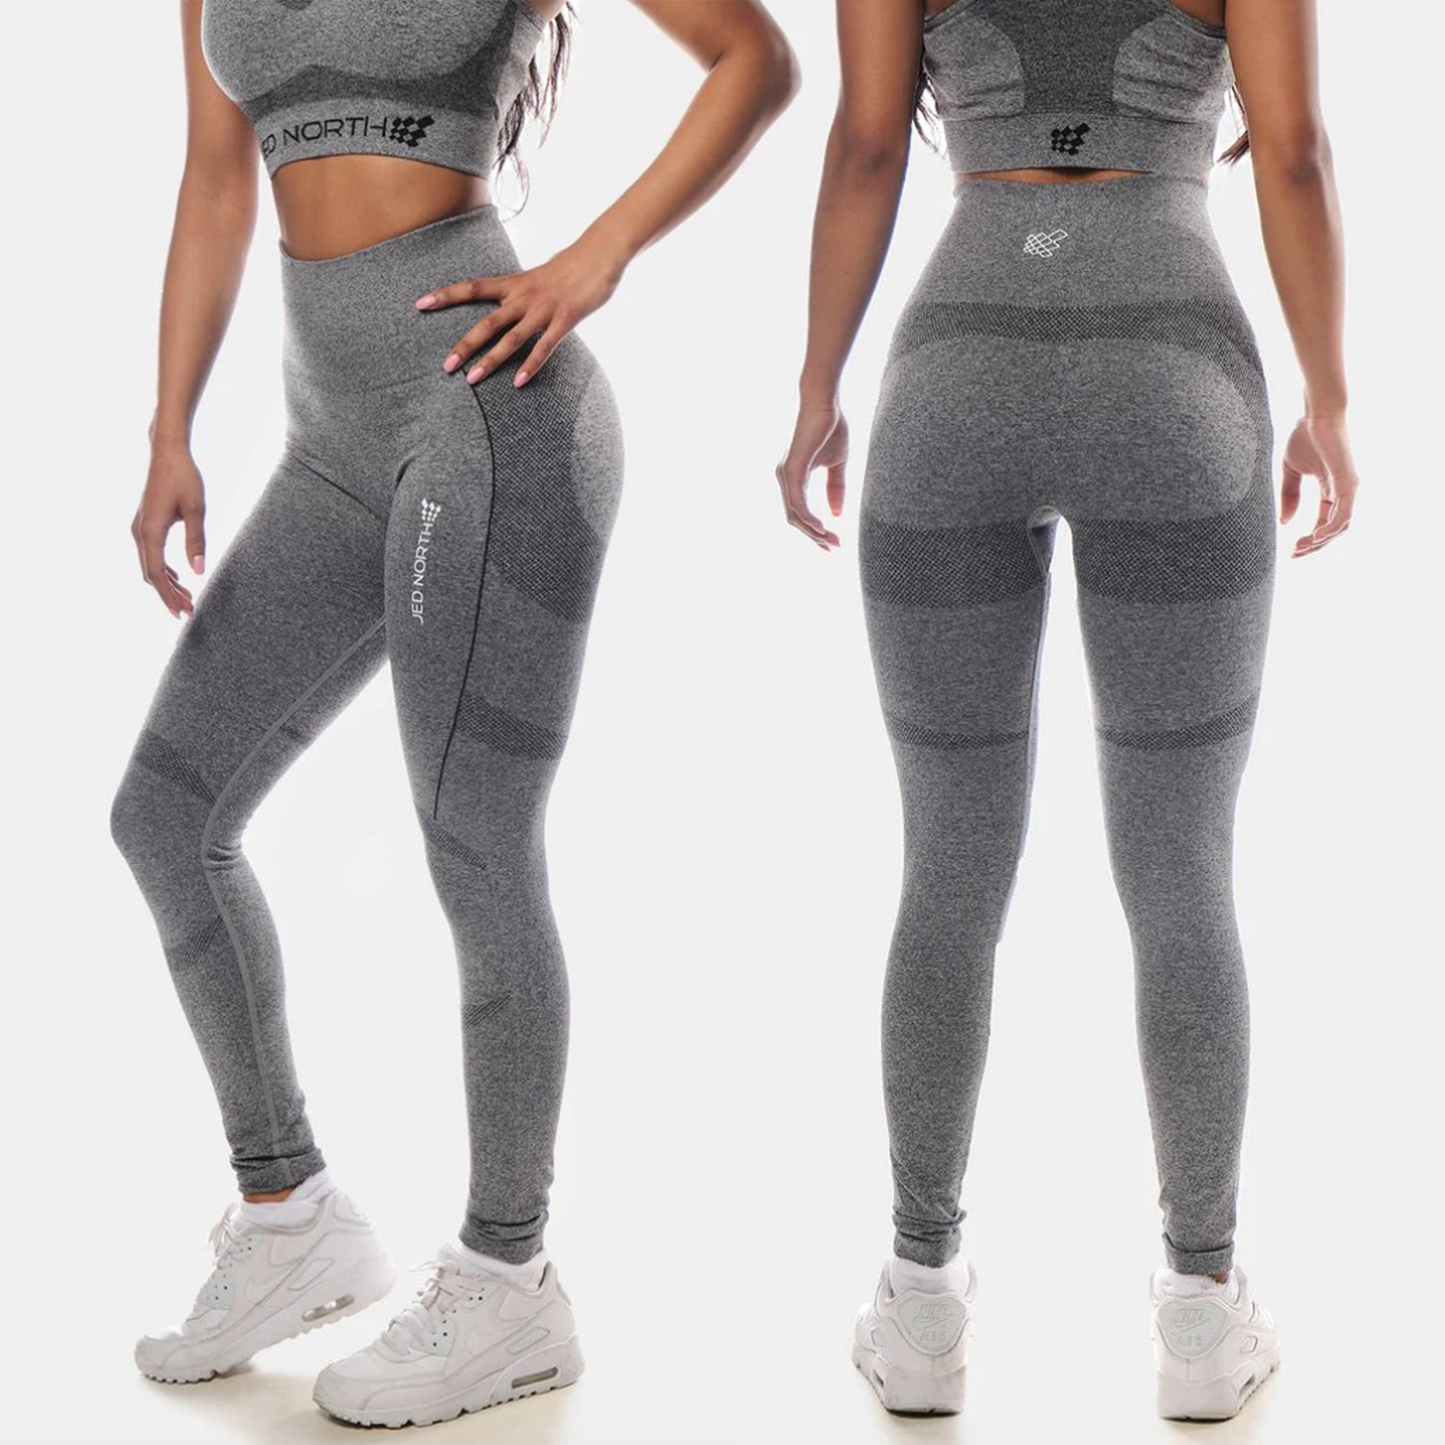 jed north supple seamless grey leggings - size xs/s